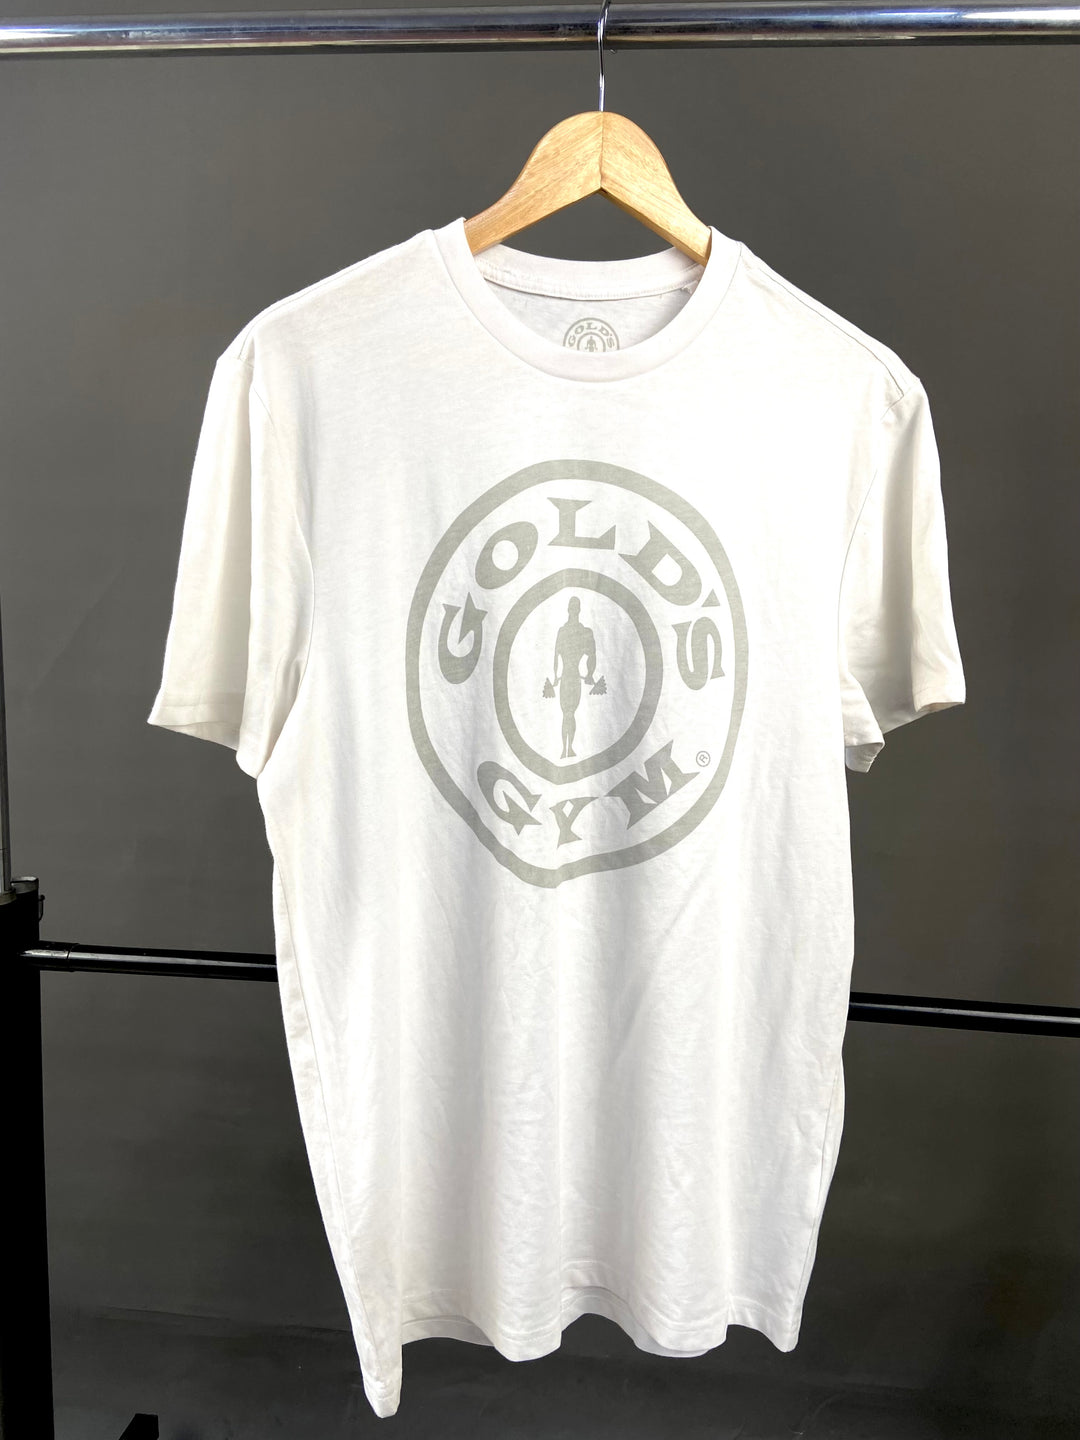 Golds gym sports t-shirt in white